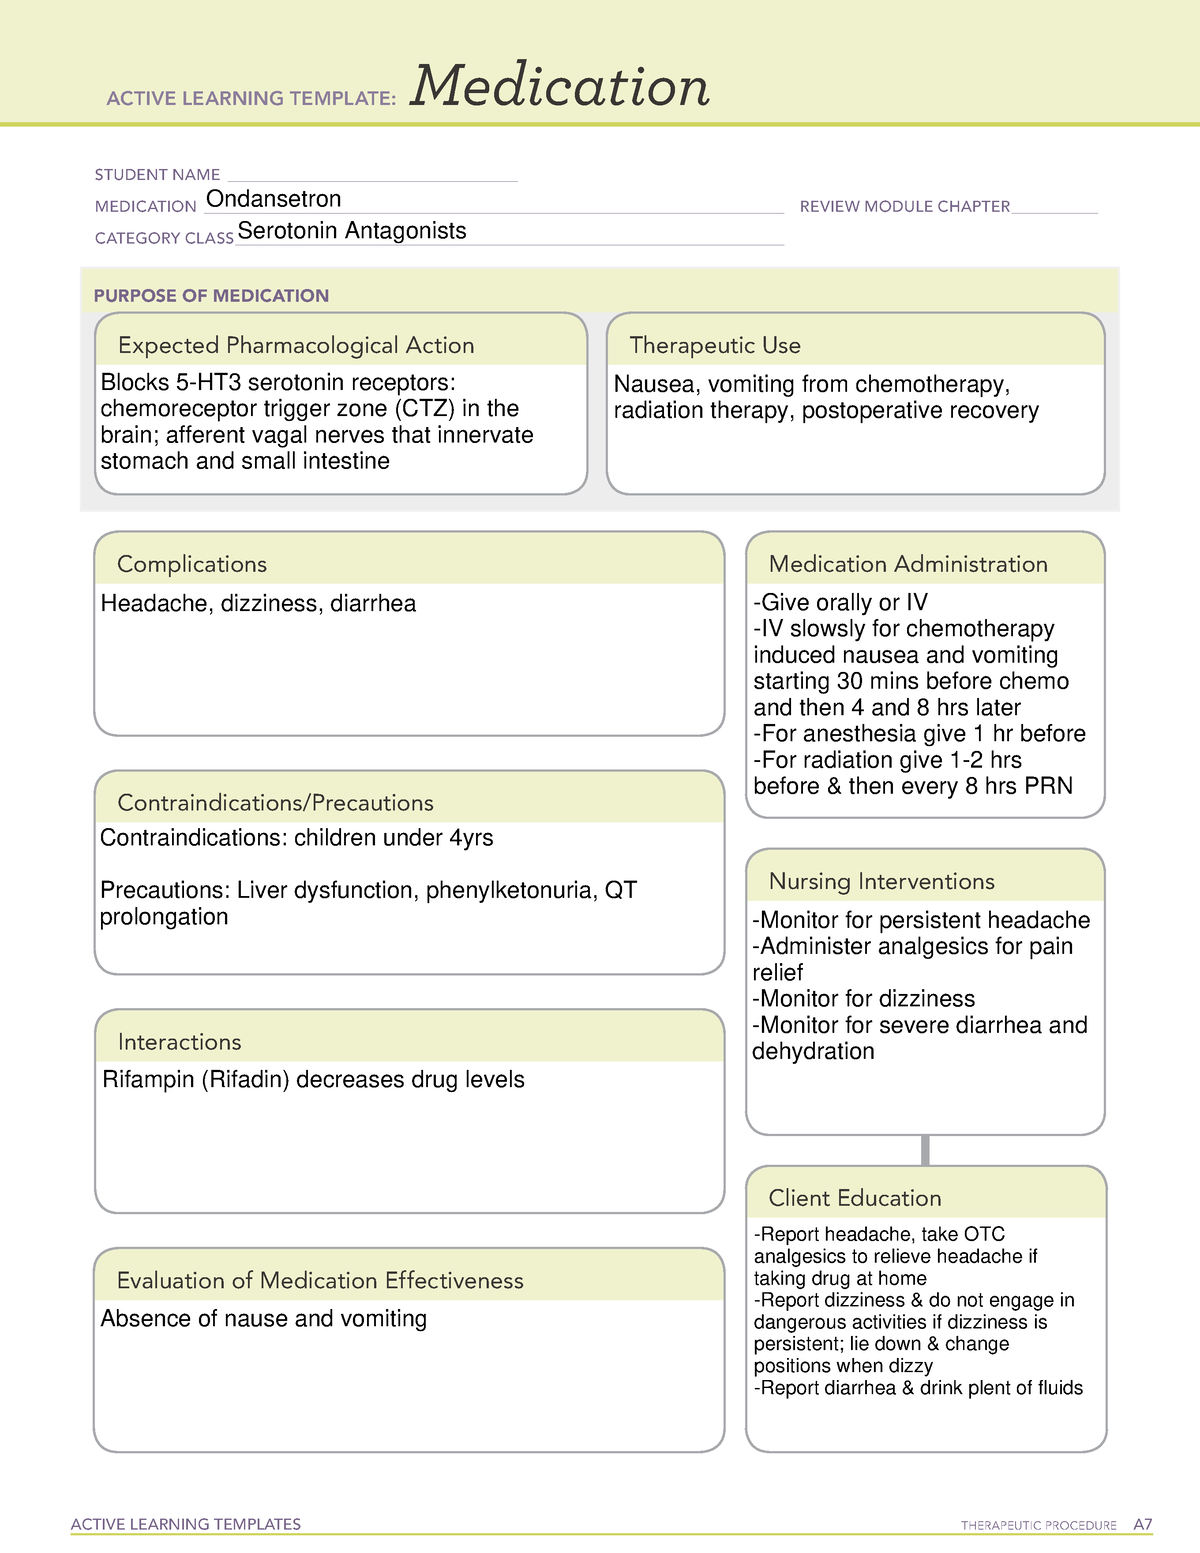 Ondansetron Drug template ACTIVE LEARNING TEMPLATES THERAPEUTIC